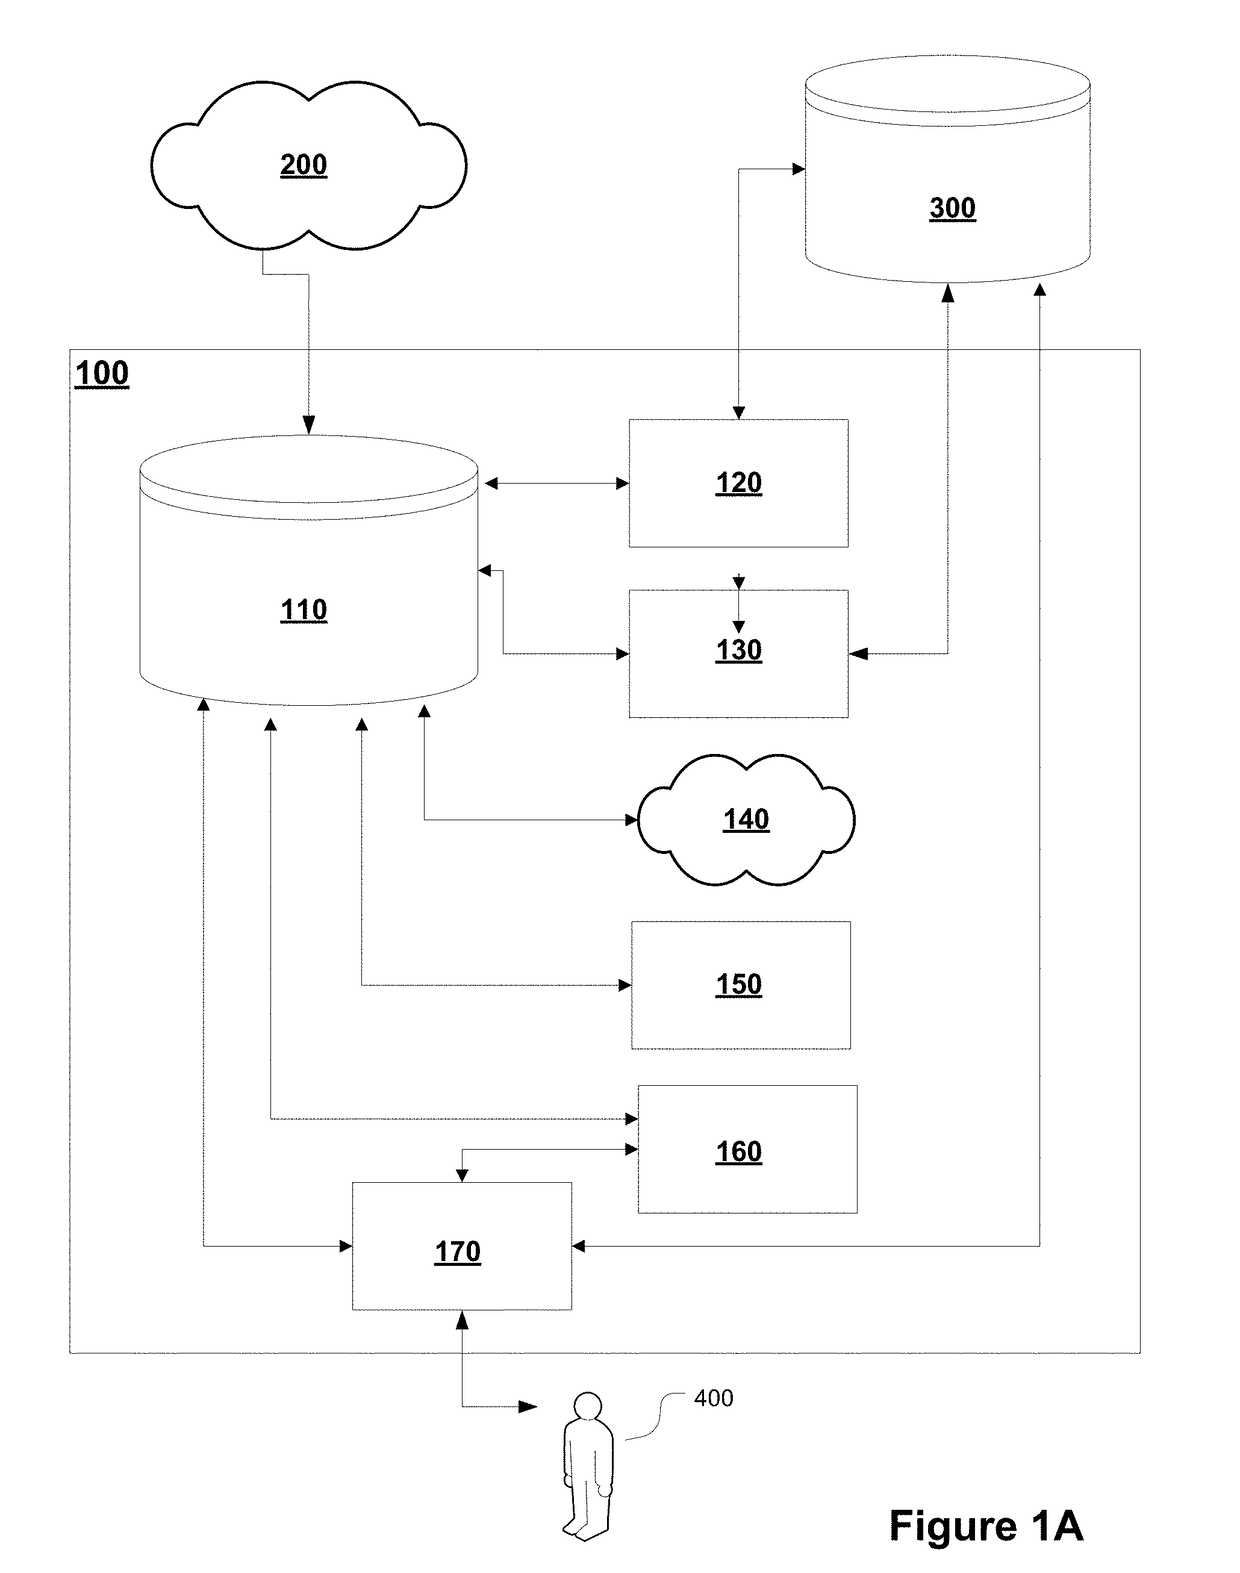 Single-entity-single-relation question answering systems, and methods